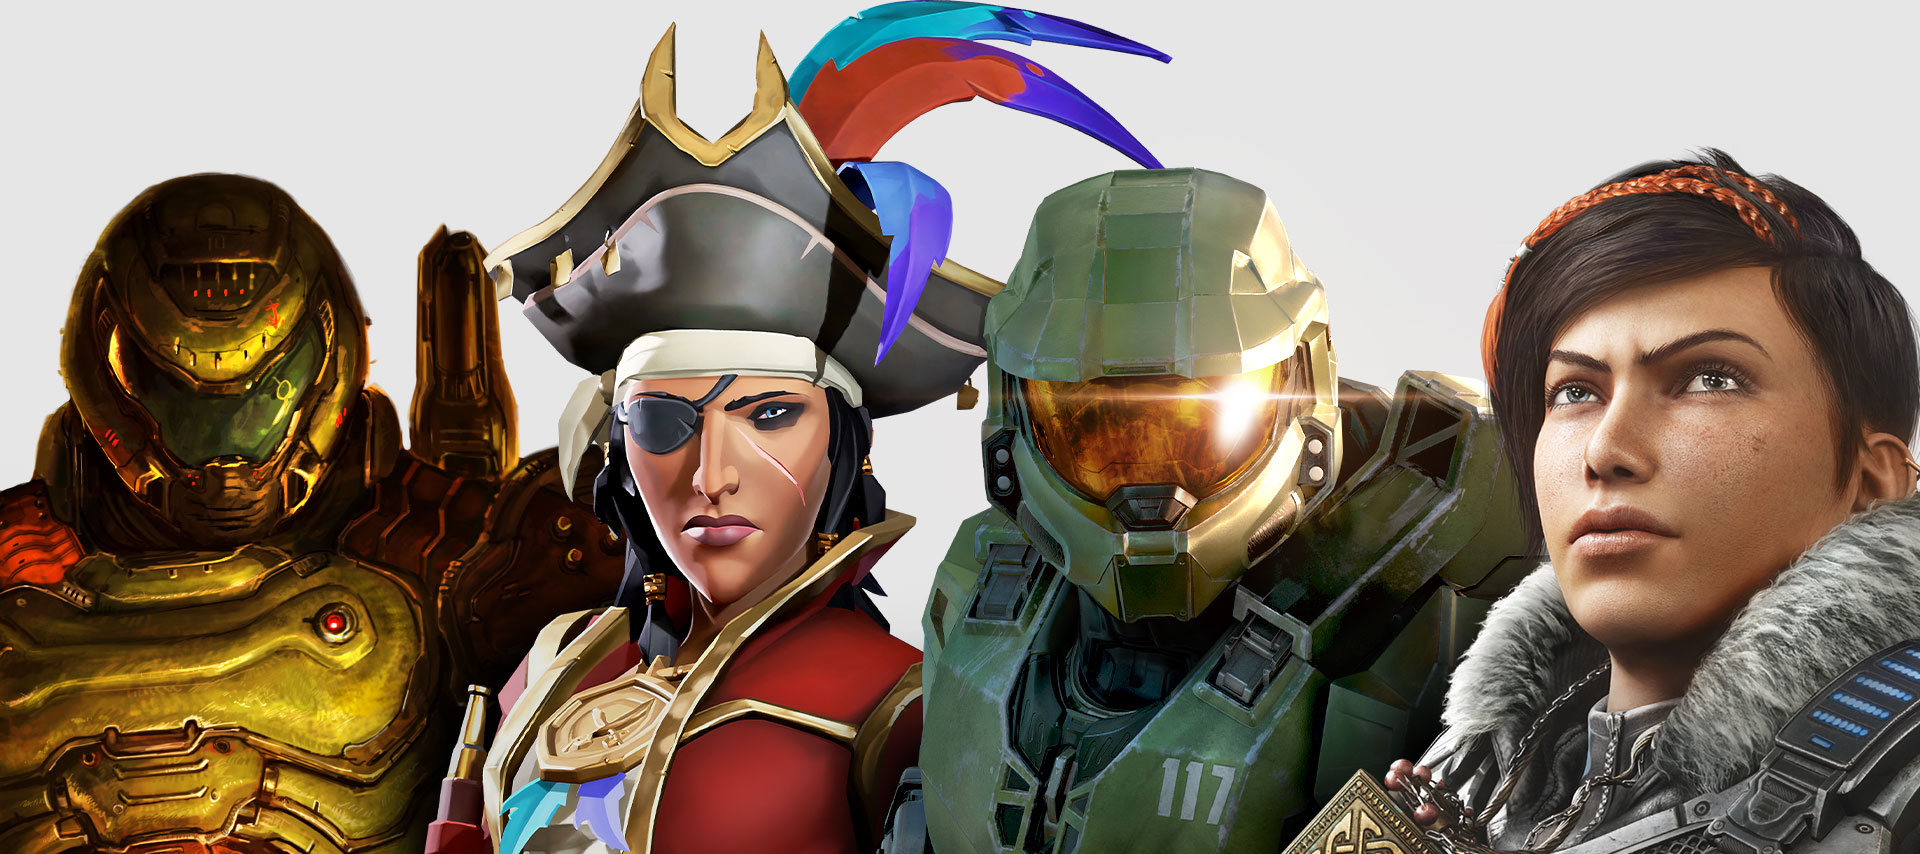 A line-up of characters featured in games on Xbox Game Pass. From left to right: DOOM Eternal, Sea of Thieves, Halo: Infinite, and Gears 5.